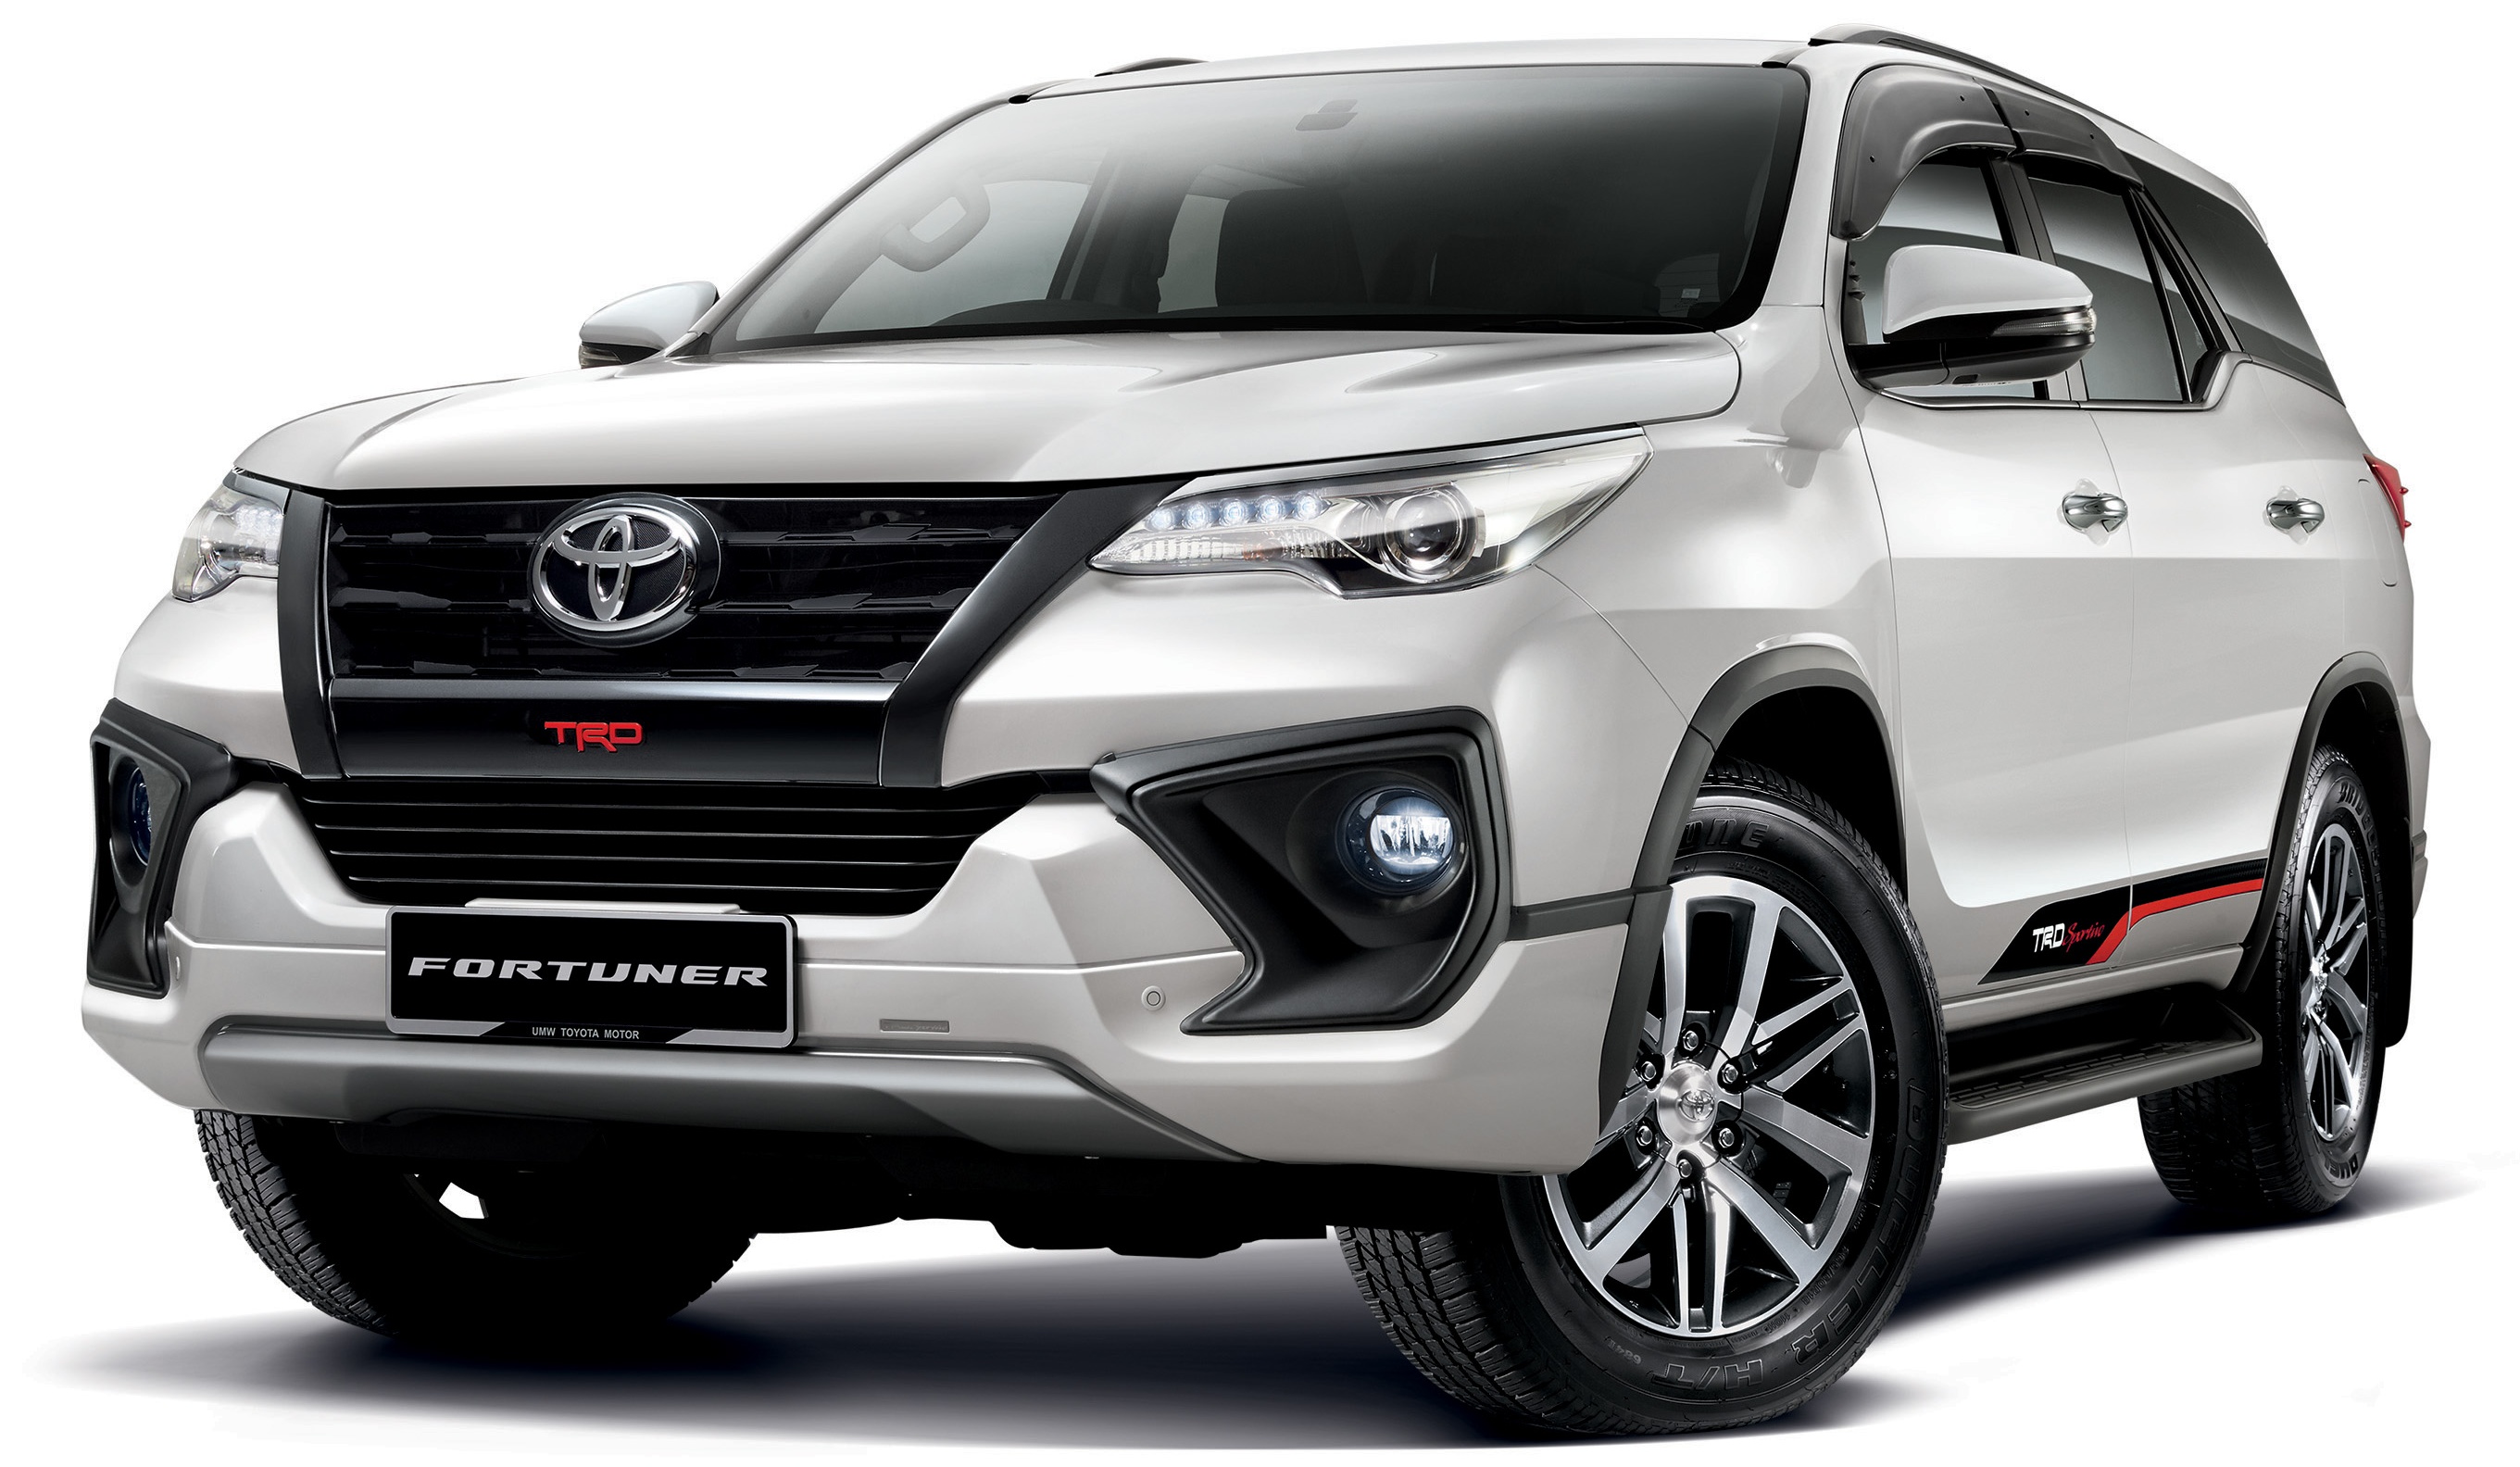 Toyota Fortuner  updated now on sale new 2 4 VRZ 4x2 and 